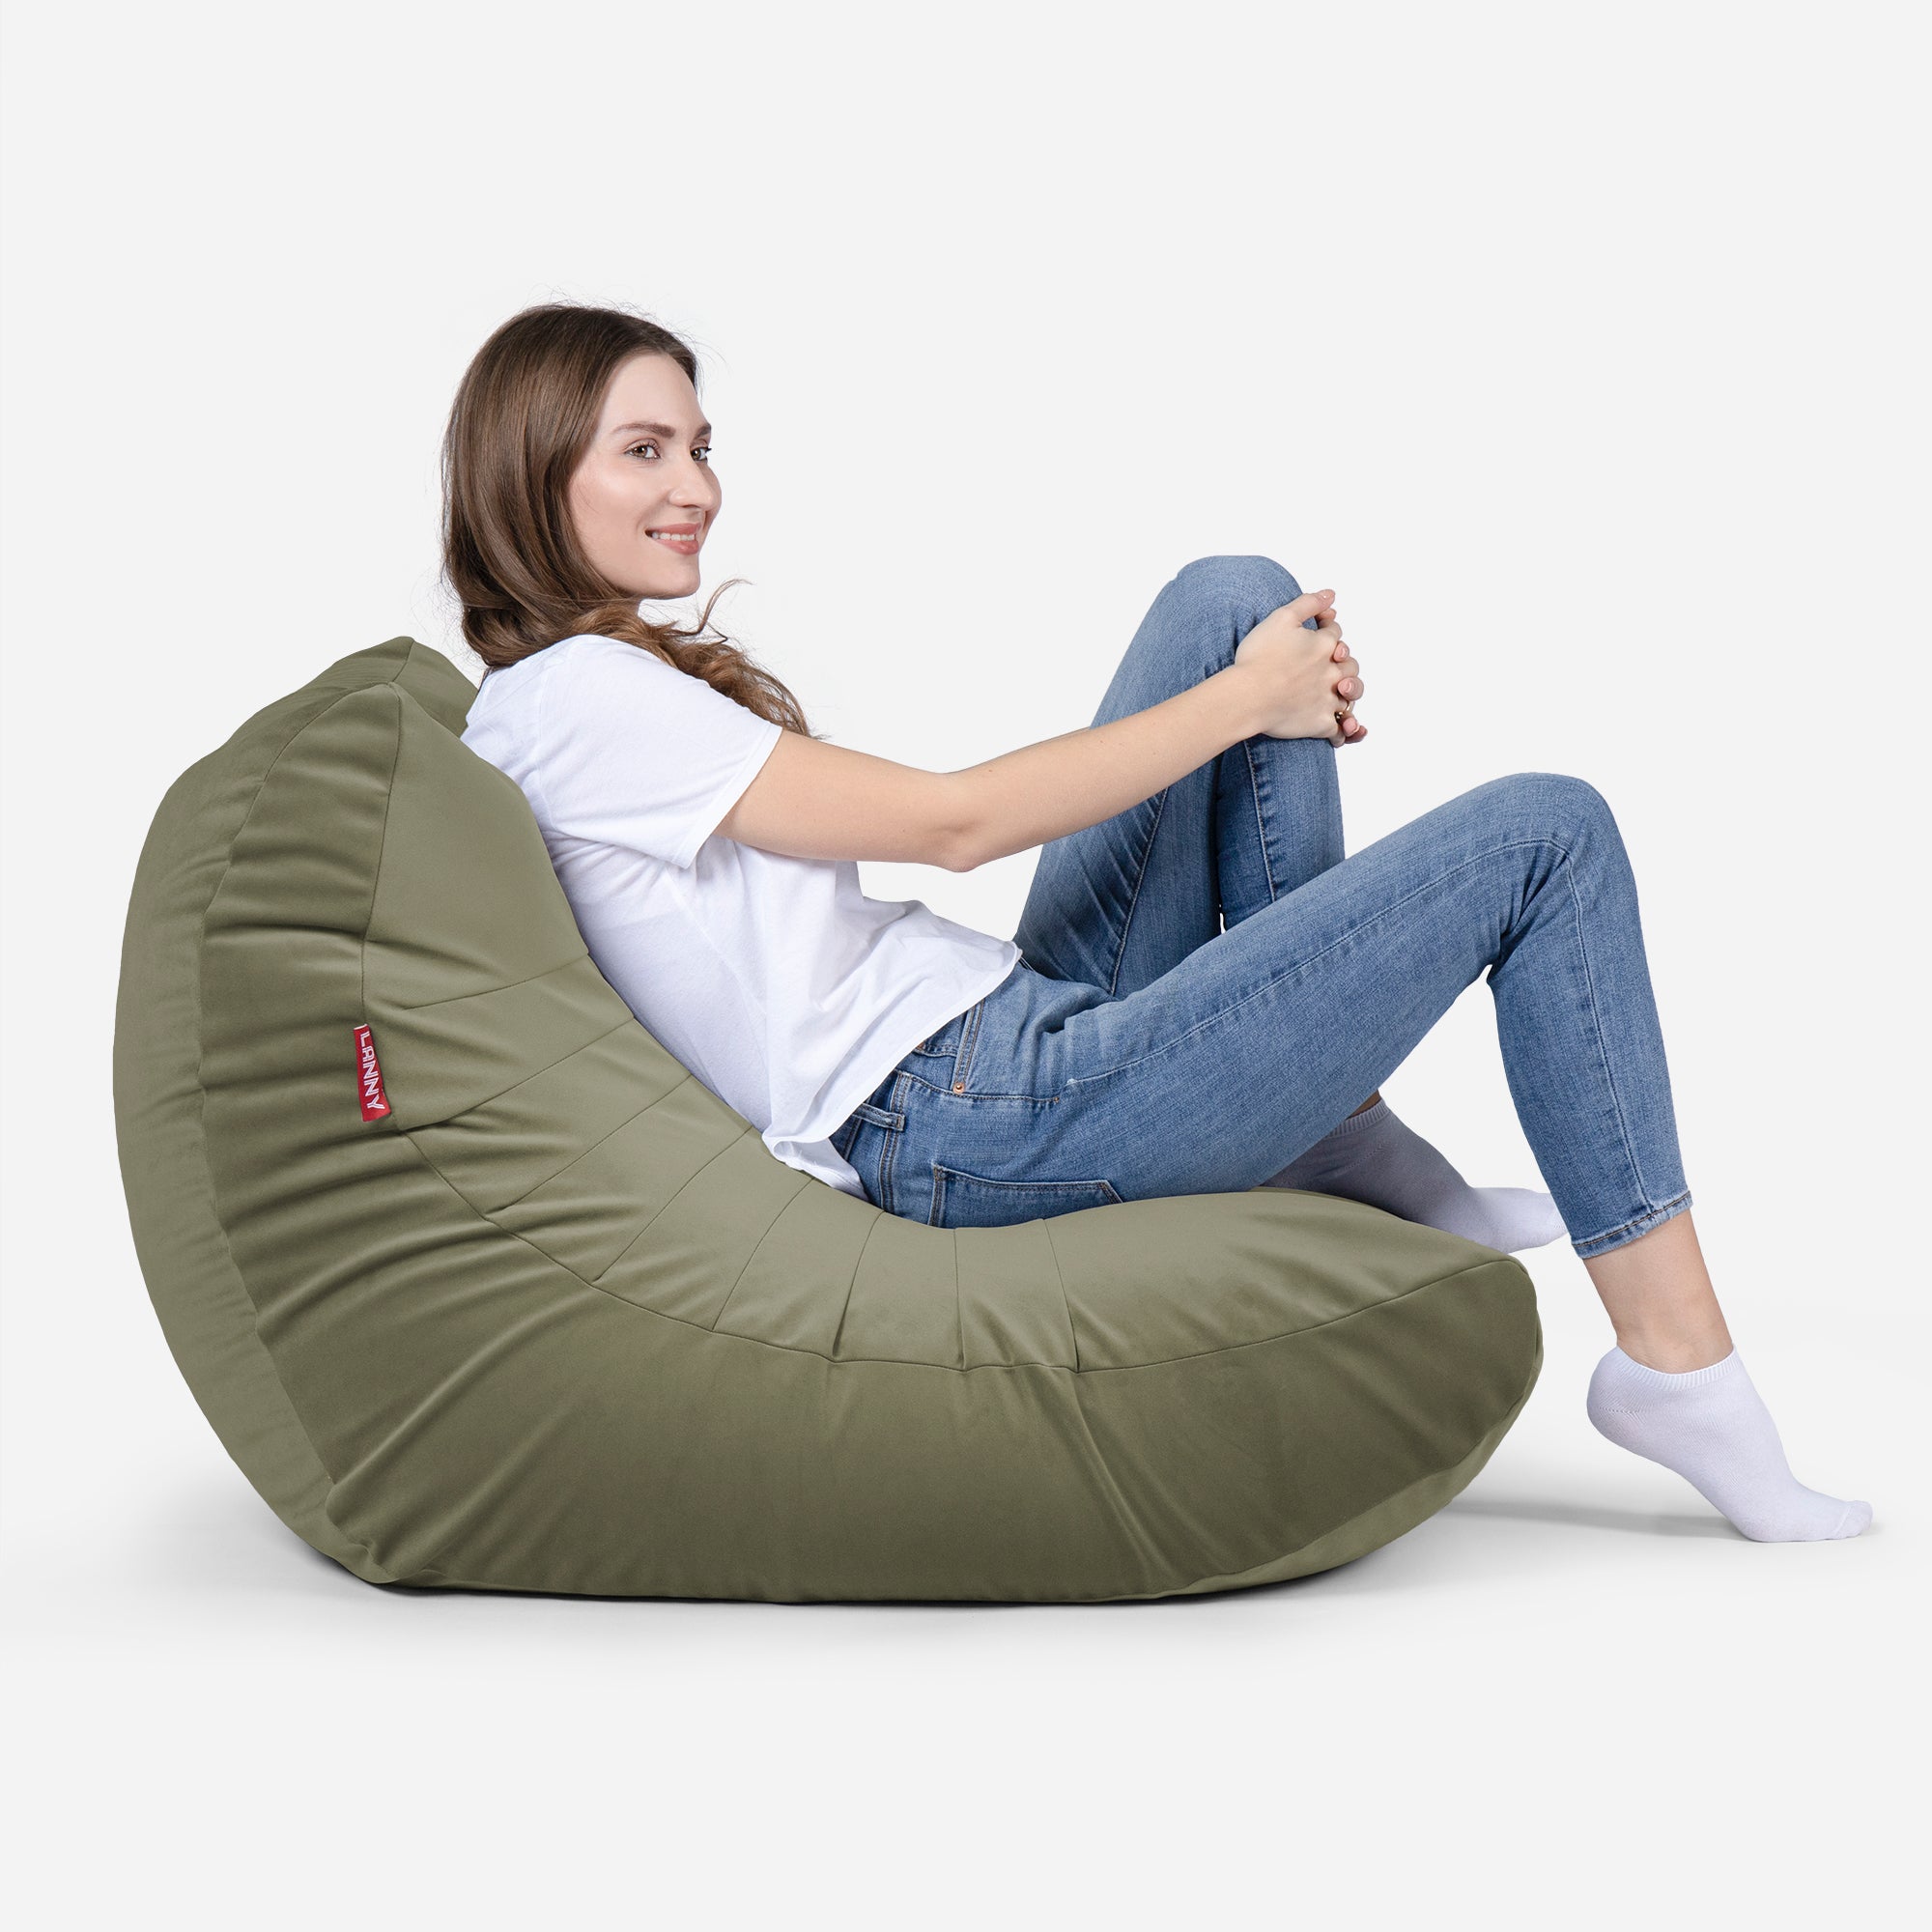 Beanbag Curvy Design Khaki color with girl seating on it